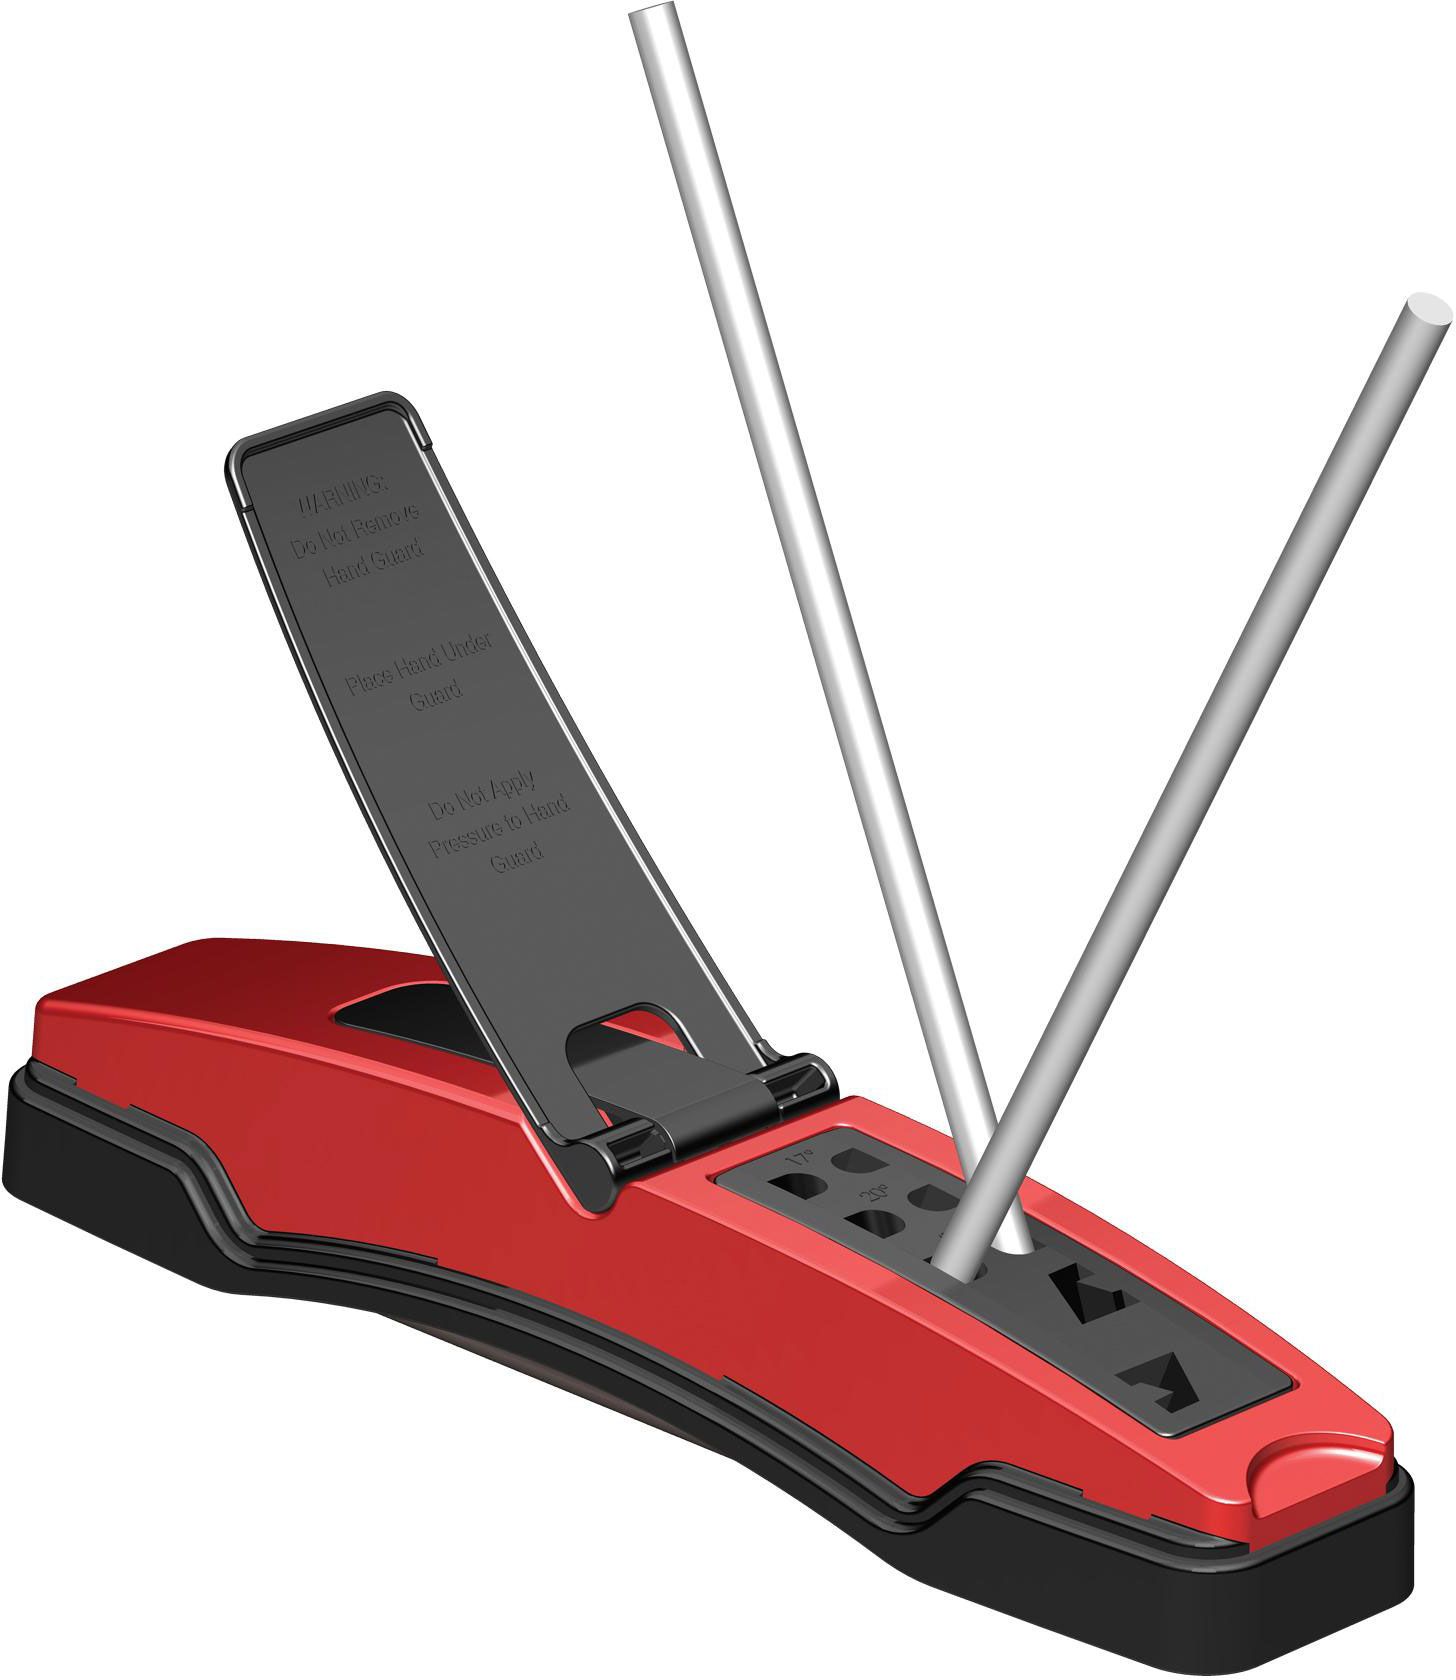 Knife Sharpeners for sale in El Paso, Texas